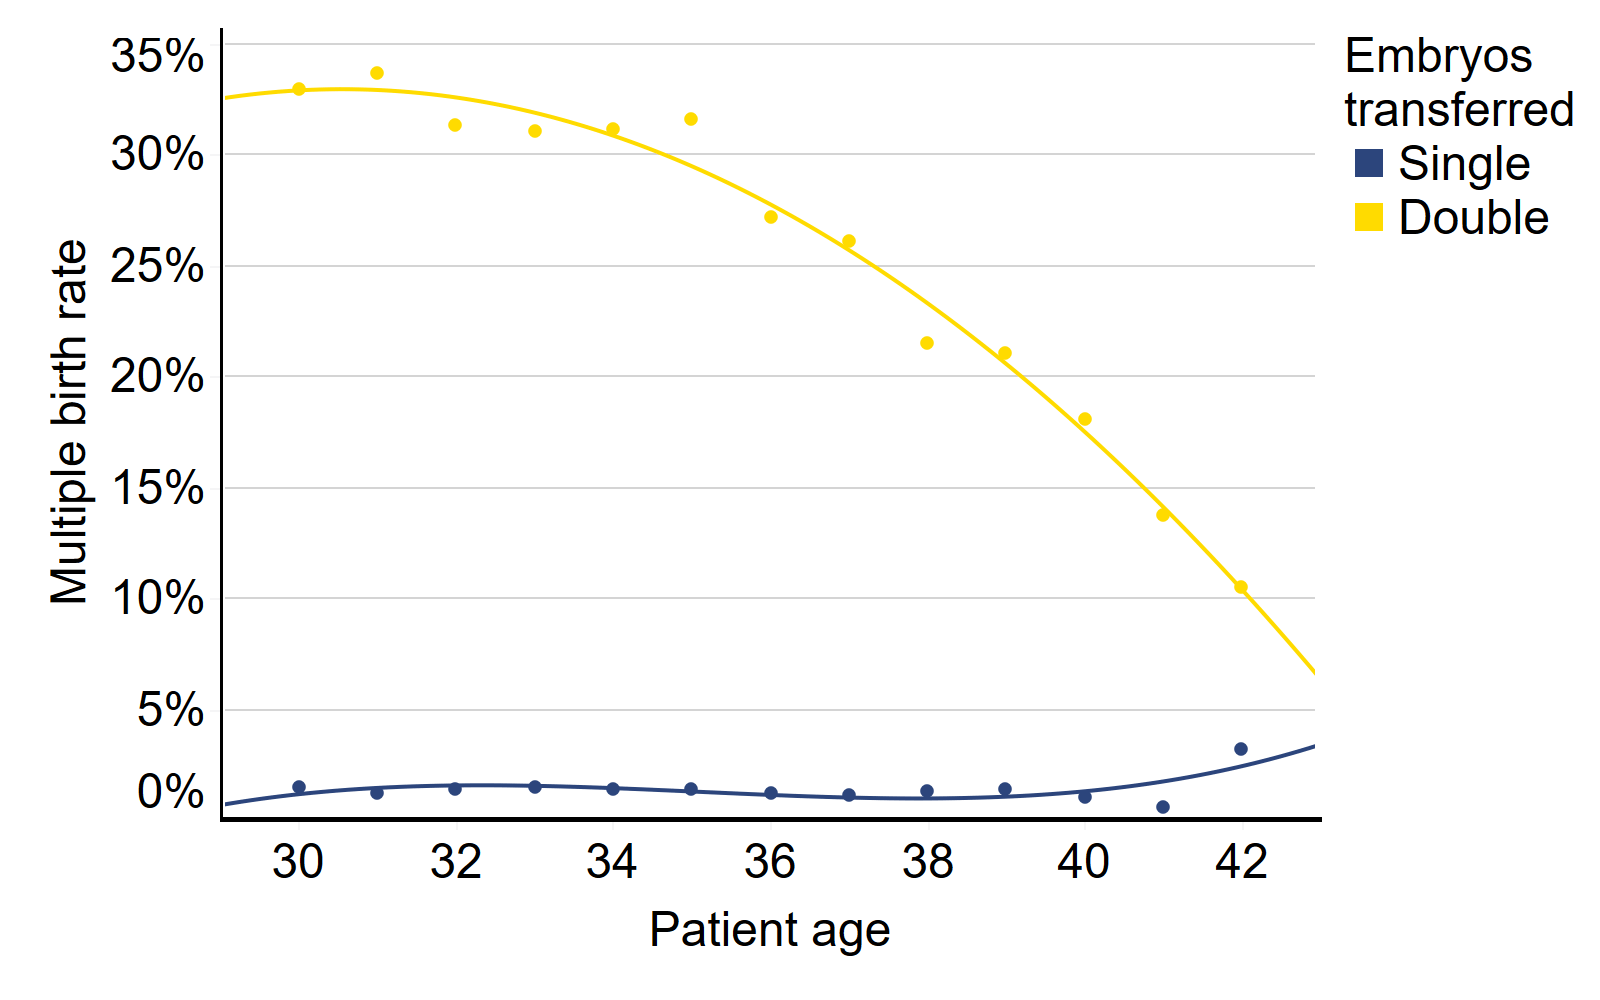 Figure 4: Average live multiple birth rate using patients own eggs by patient age and embryos transferred, 2015-2019. Average live multiple birth rate using patients own eggs by patient age and embryos transferred, 2015-2019. This line chart shows the average multiple birth rate using patients own eggs, by age and number of embryos transferred, 2015-2019. Patients using single embryo transfer experience low multiple birth rates. Patients using double embryo transfer experience higher multiple birth rates, and younger patients are most affected. An accessible form of the underlying data for this figure can be downloaded beneath the image in .xls format.